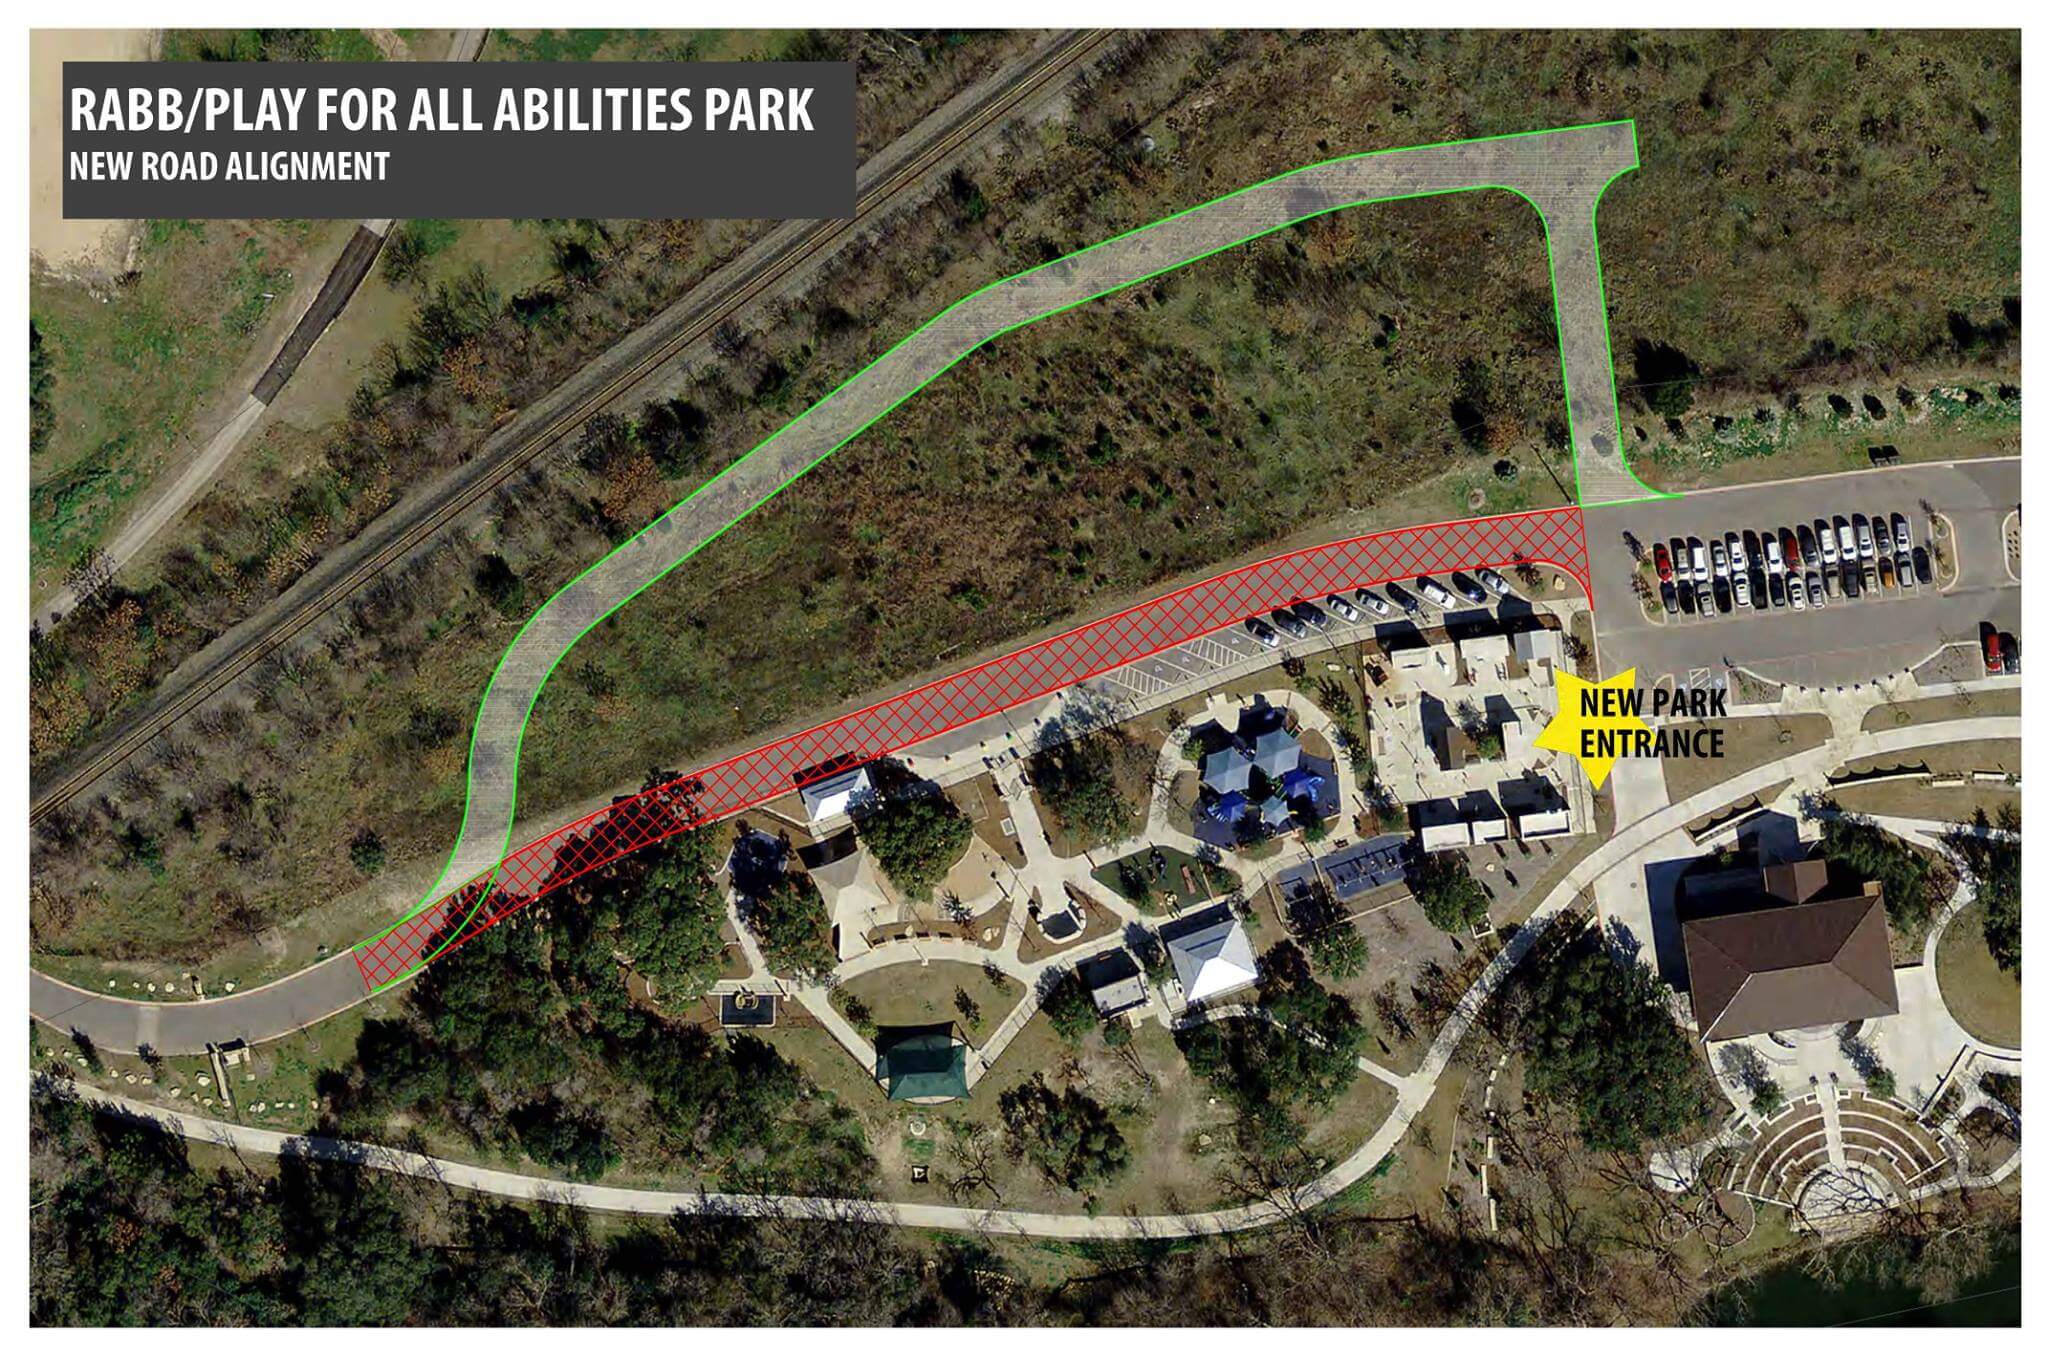 Expansion Construction To Close Rabb Play For All Abilities Park Portions Of July City Of Round Rock